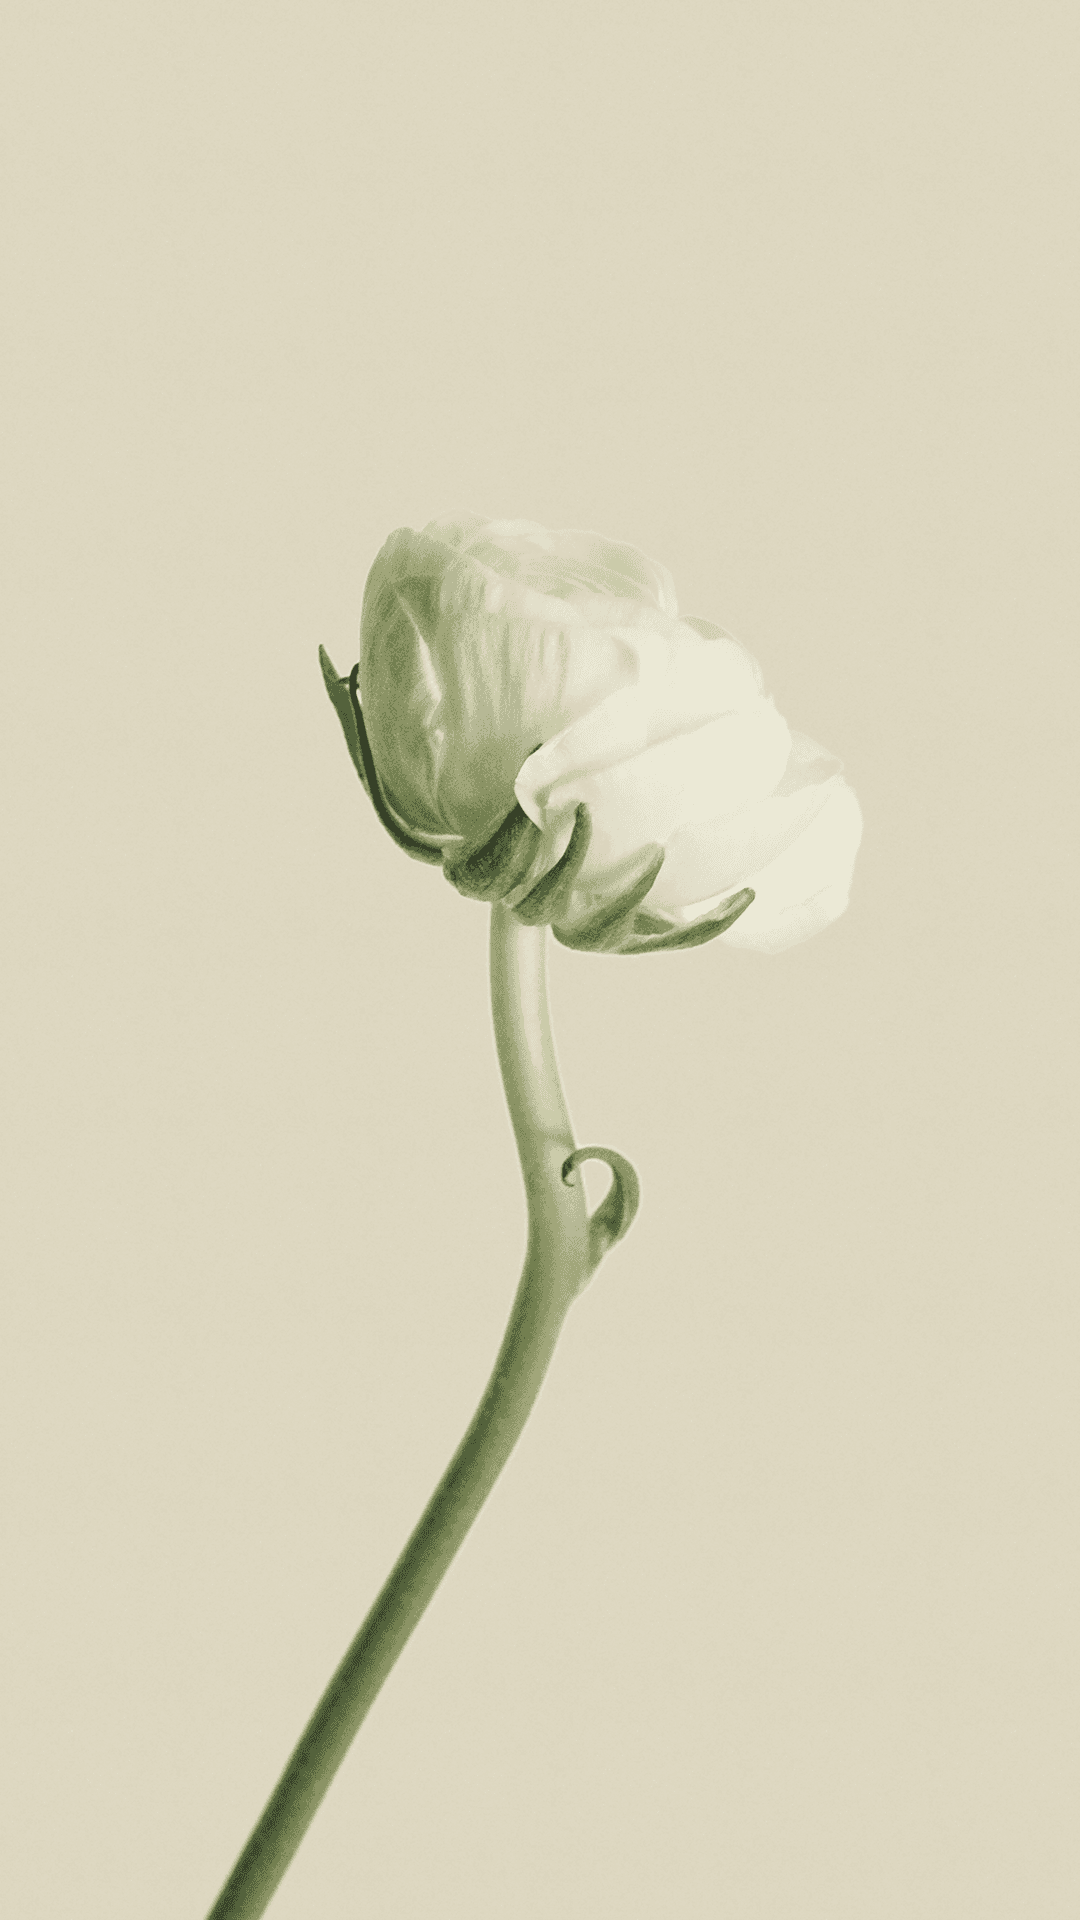 Caption: Elegant Simplicity - A Single Blooming Flower On A Minimalist White Background